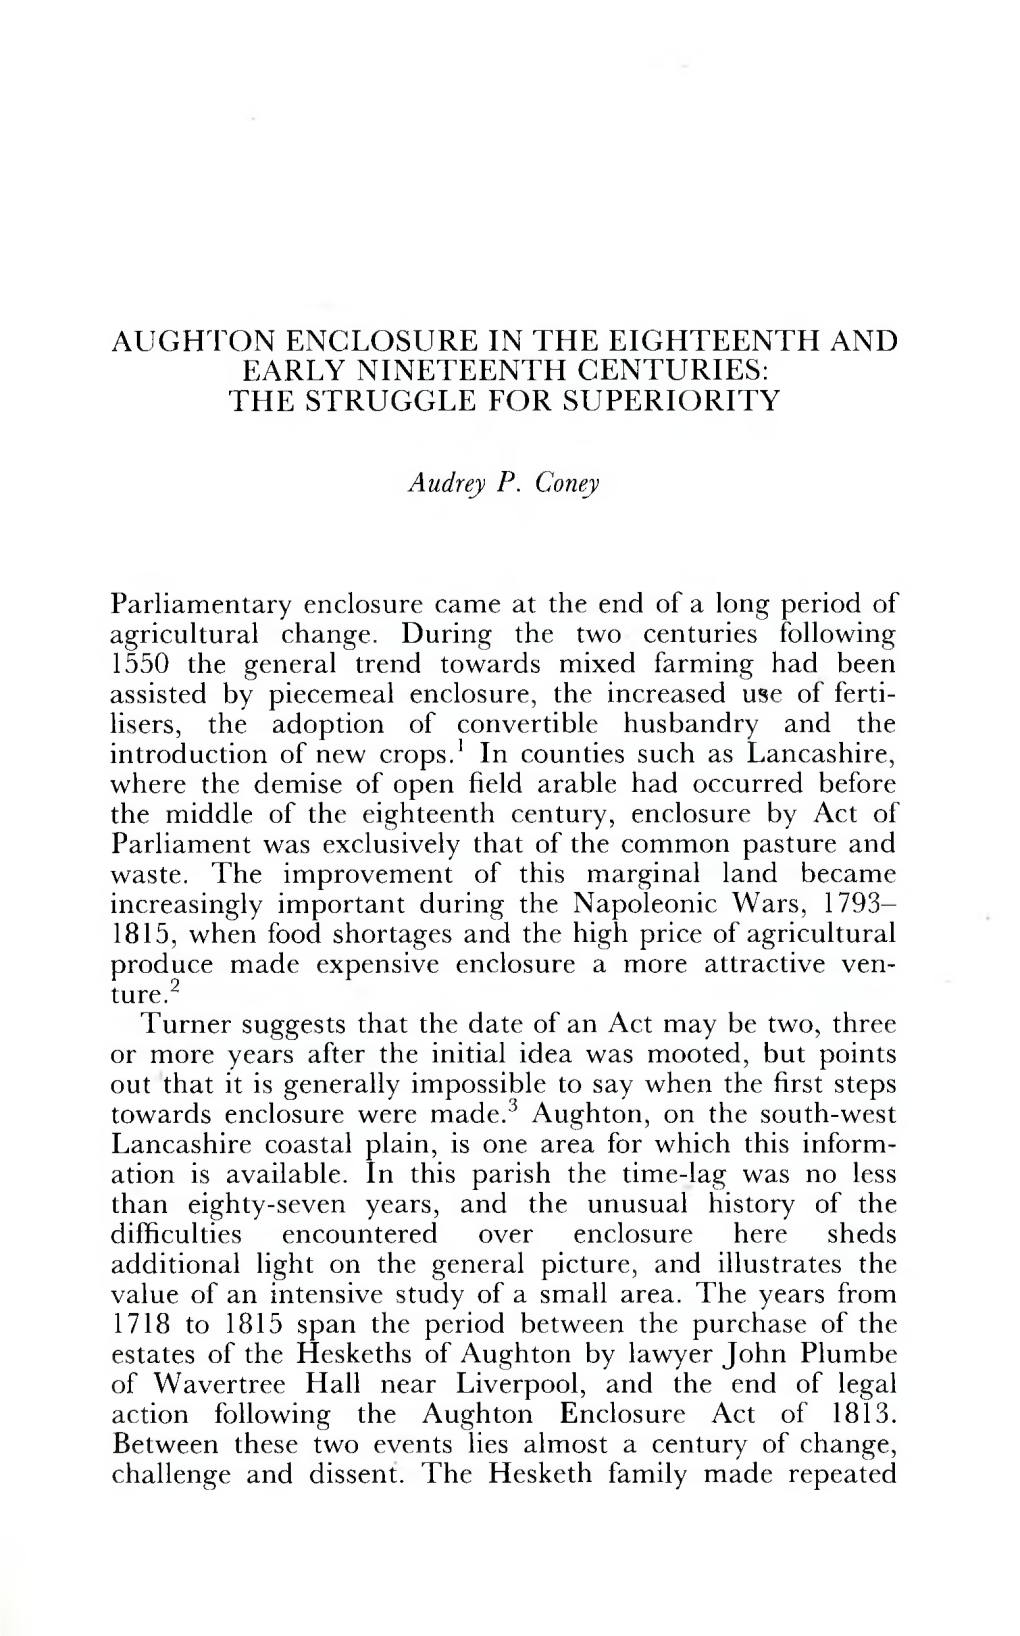 Aughton Enclosure in the Eighteenth and Early Nineteenth Centuries: the Struggle for Superiority